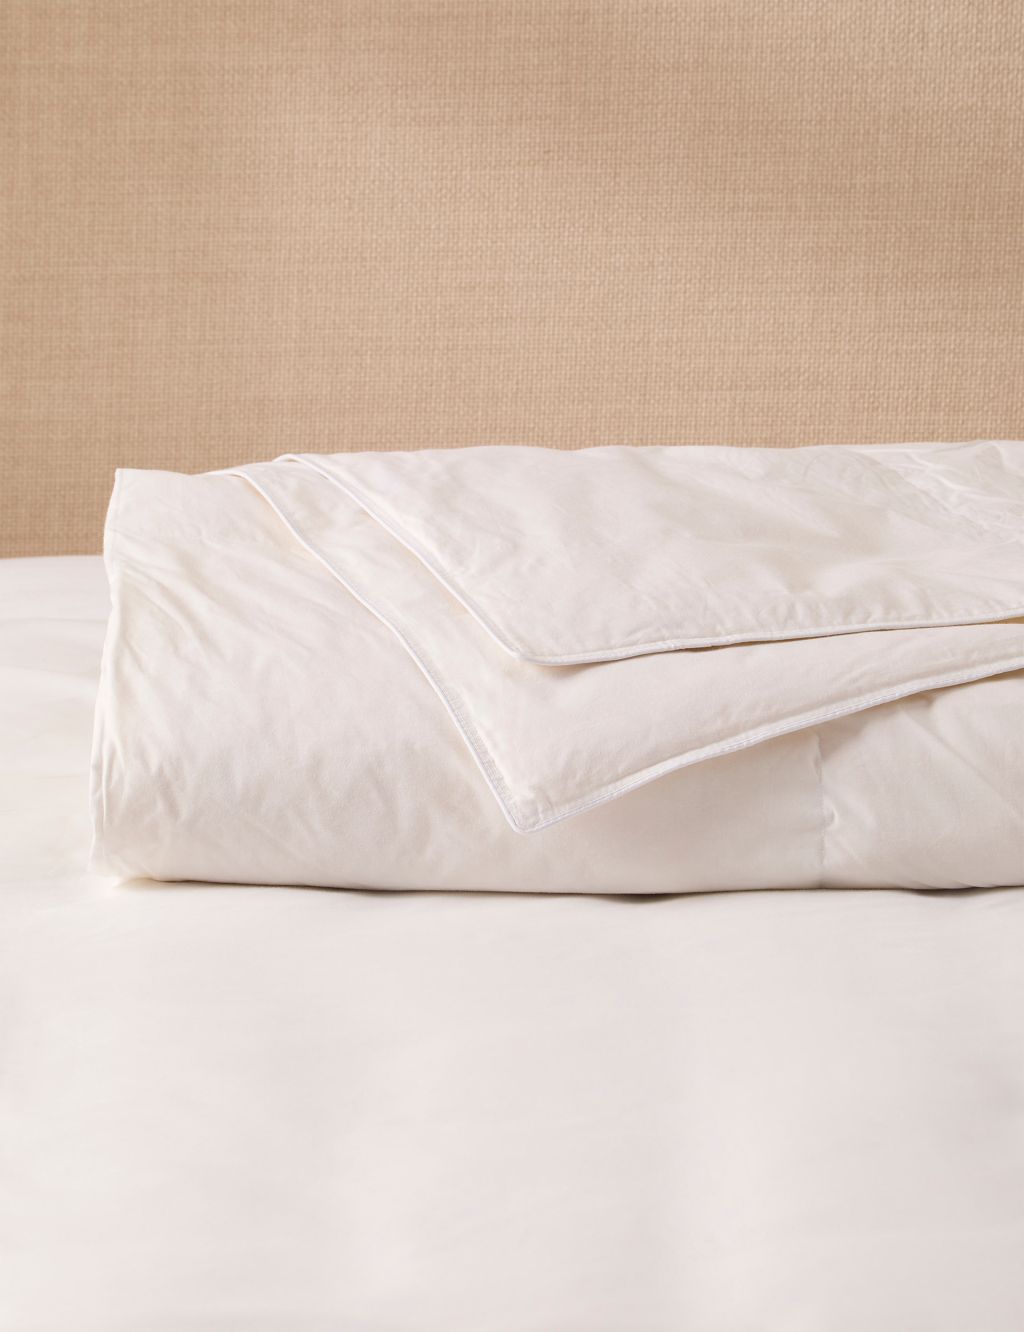 Duck Feather & Down 2.5 Tog Duvet image 1